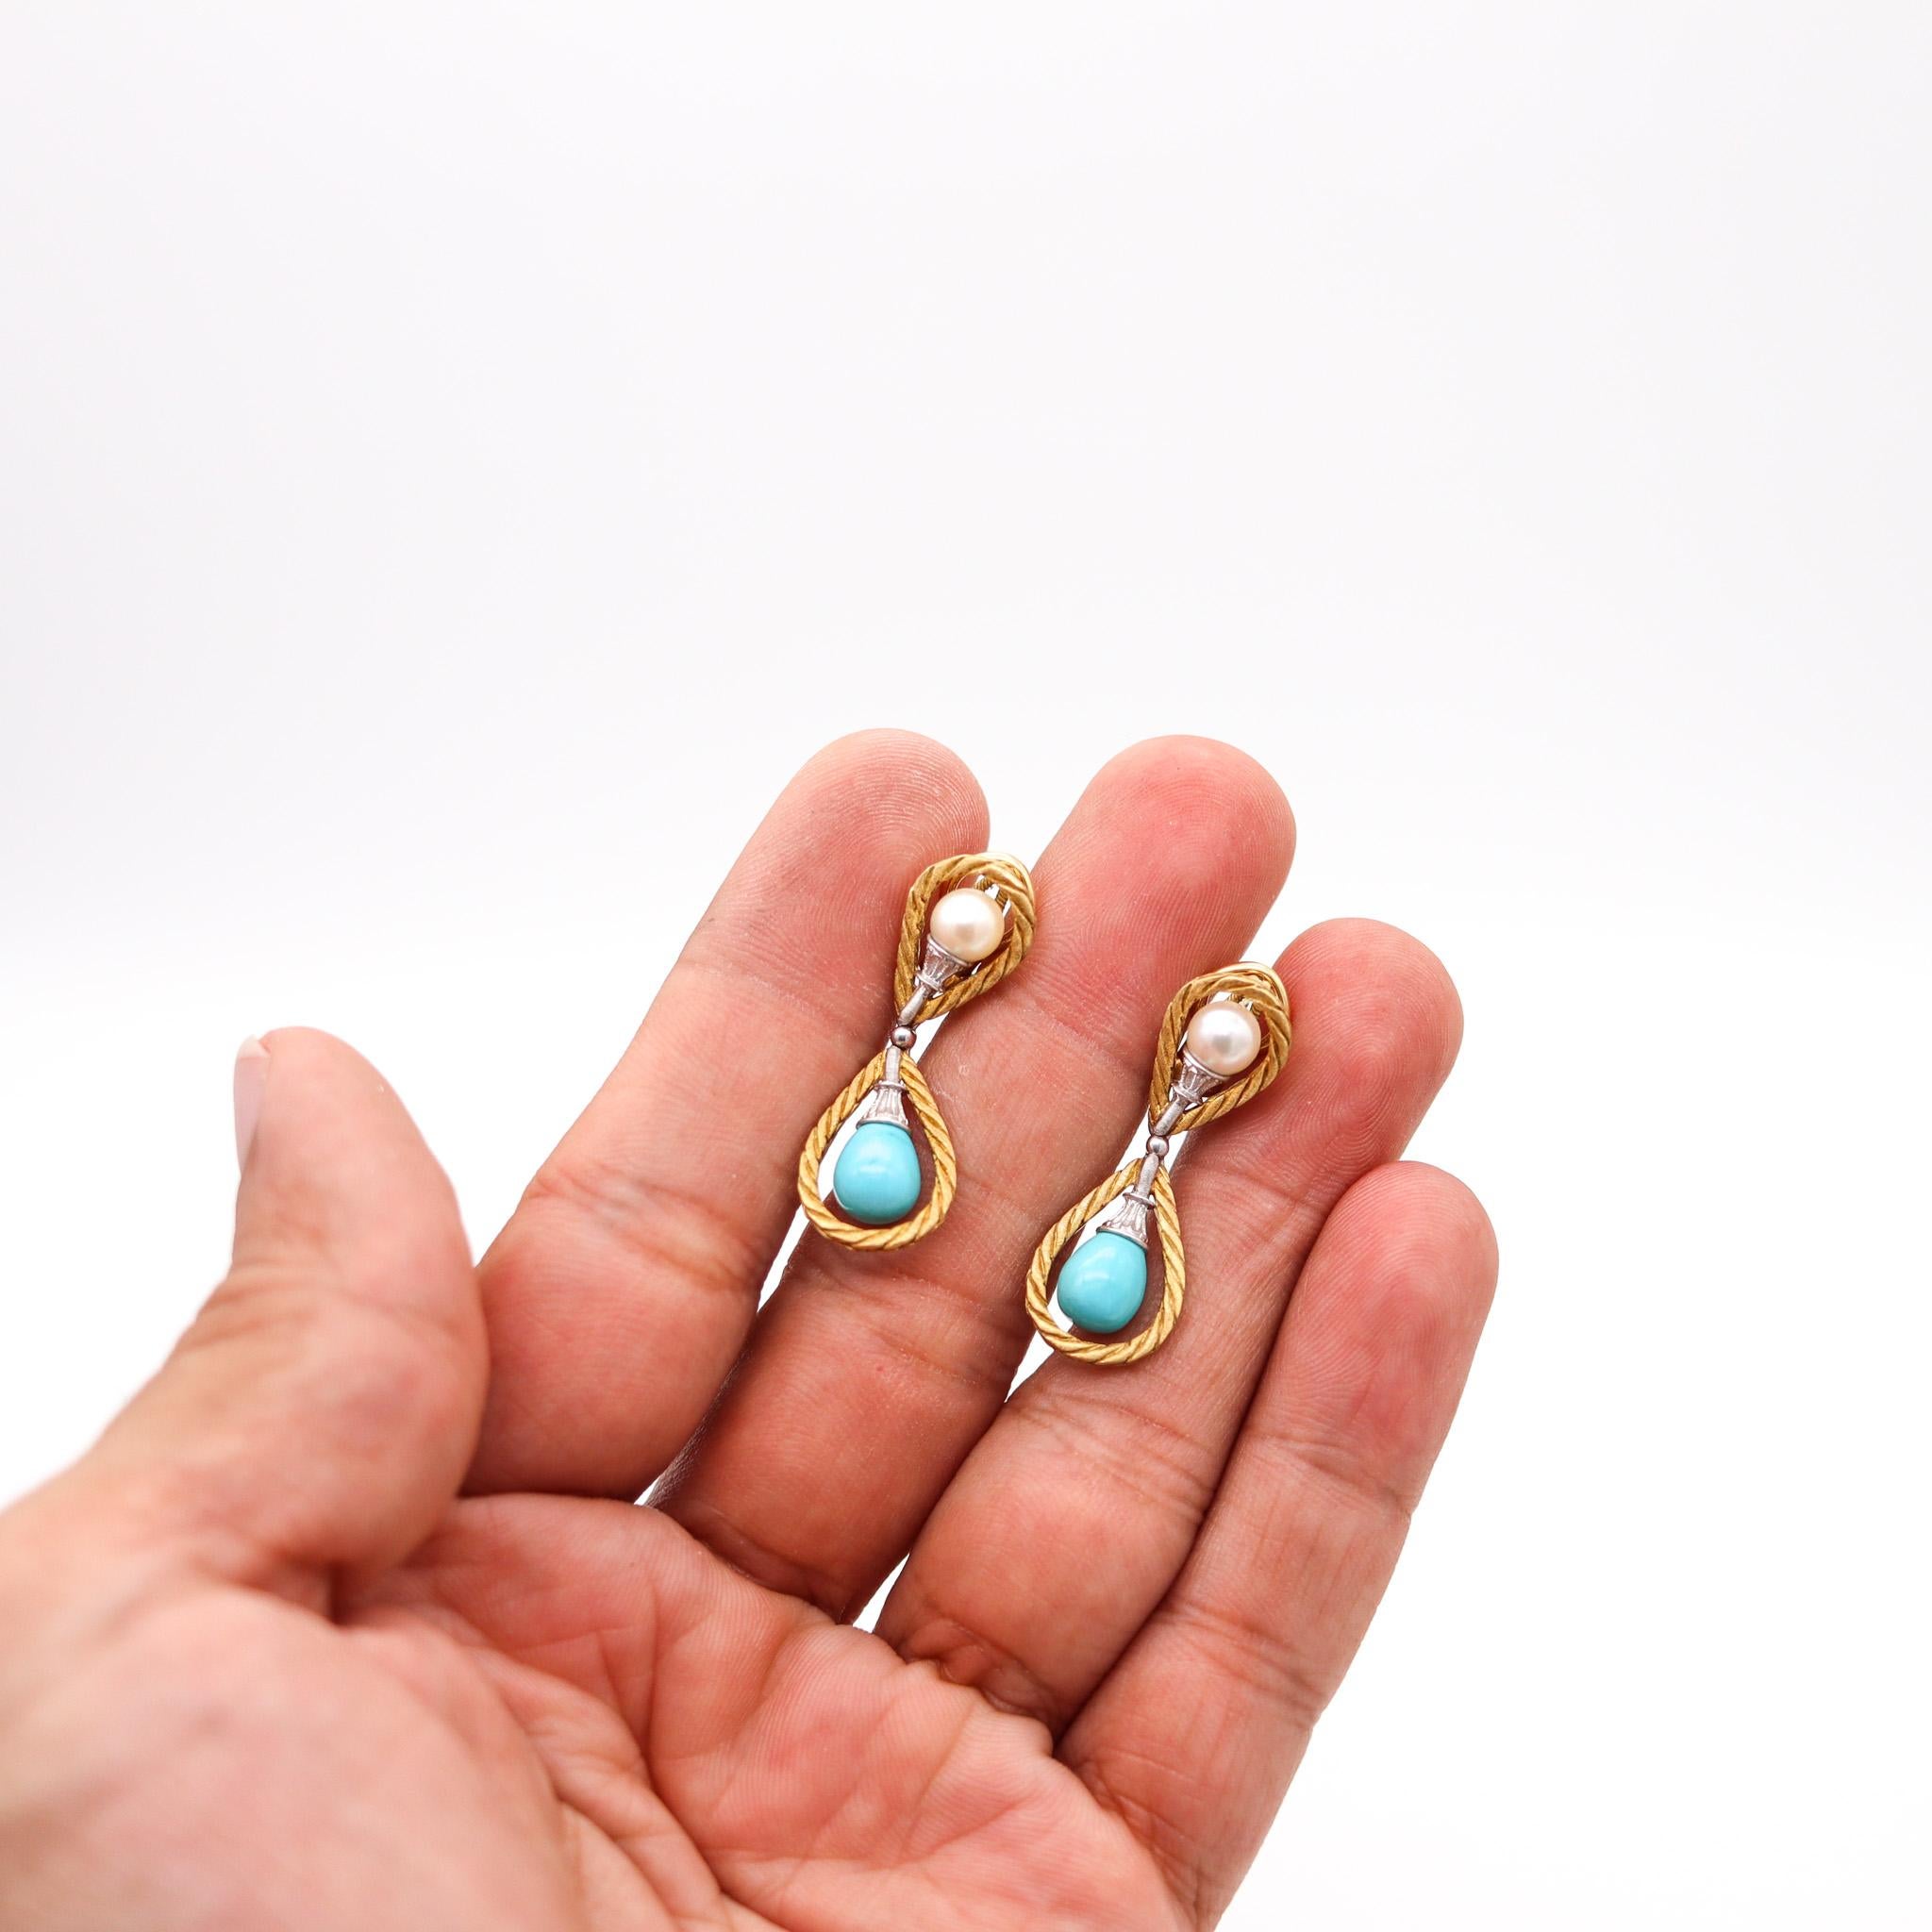 Mario Buccellati 1970 Dangle Earrings In 18Kt Gold With Turquoises and Pearls For Sale 1